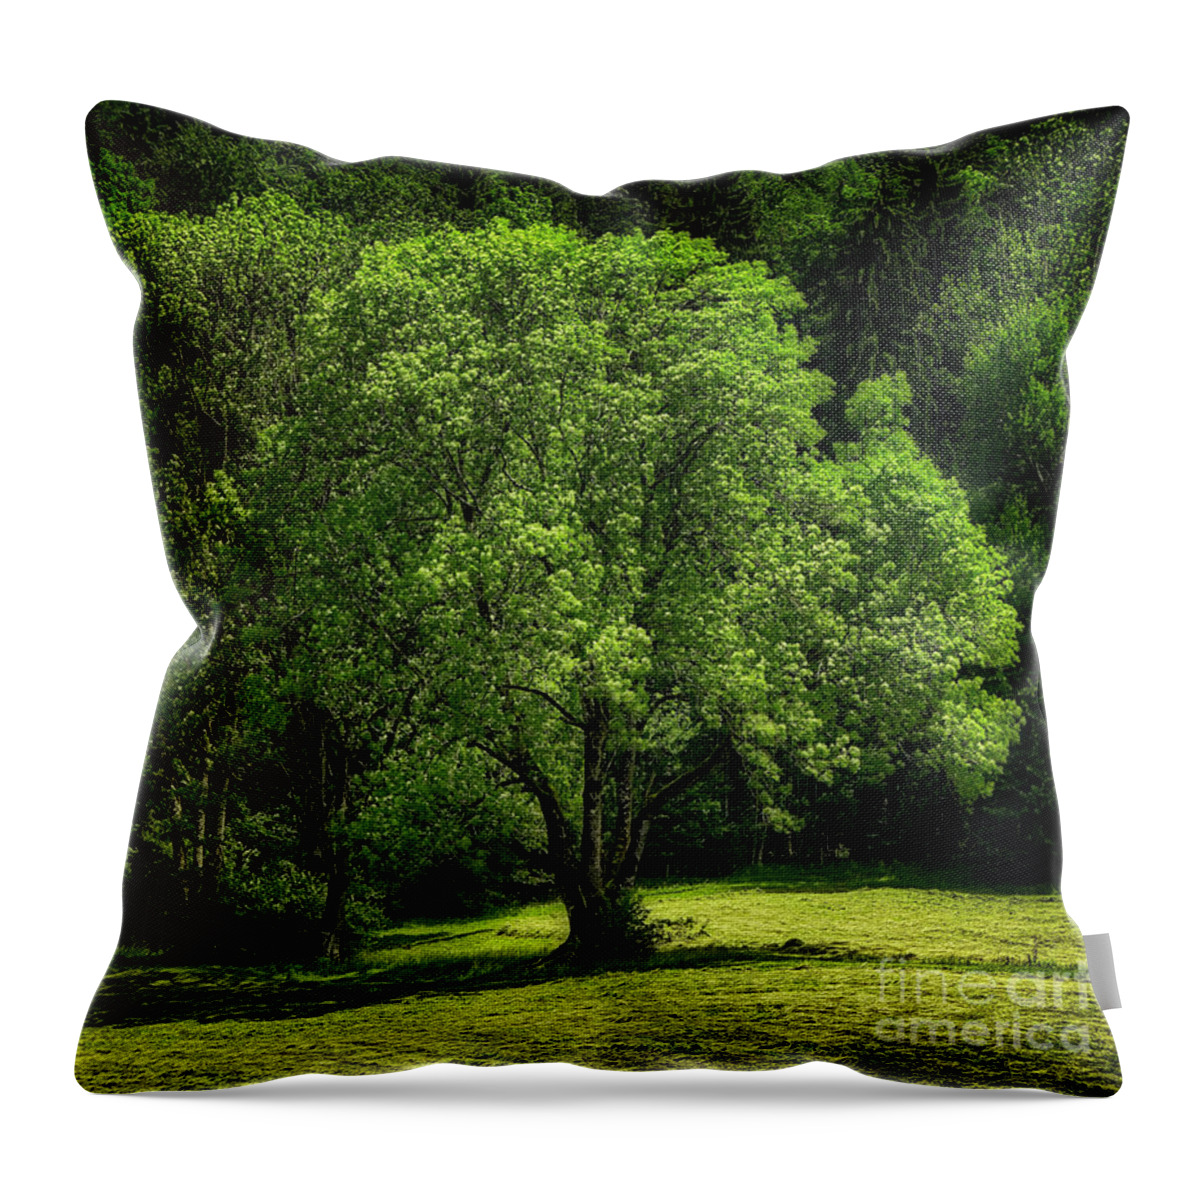 Nag005019 Throw Pillow featuring the photograph The Green of Summer by Edmund Nagele FRPS